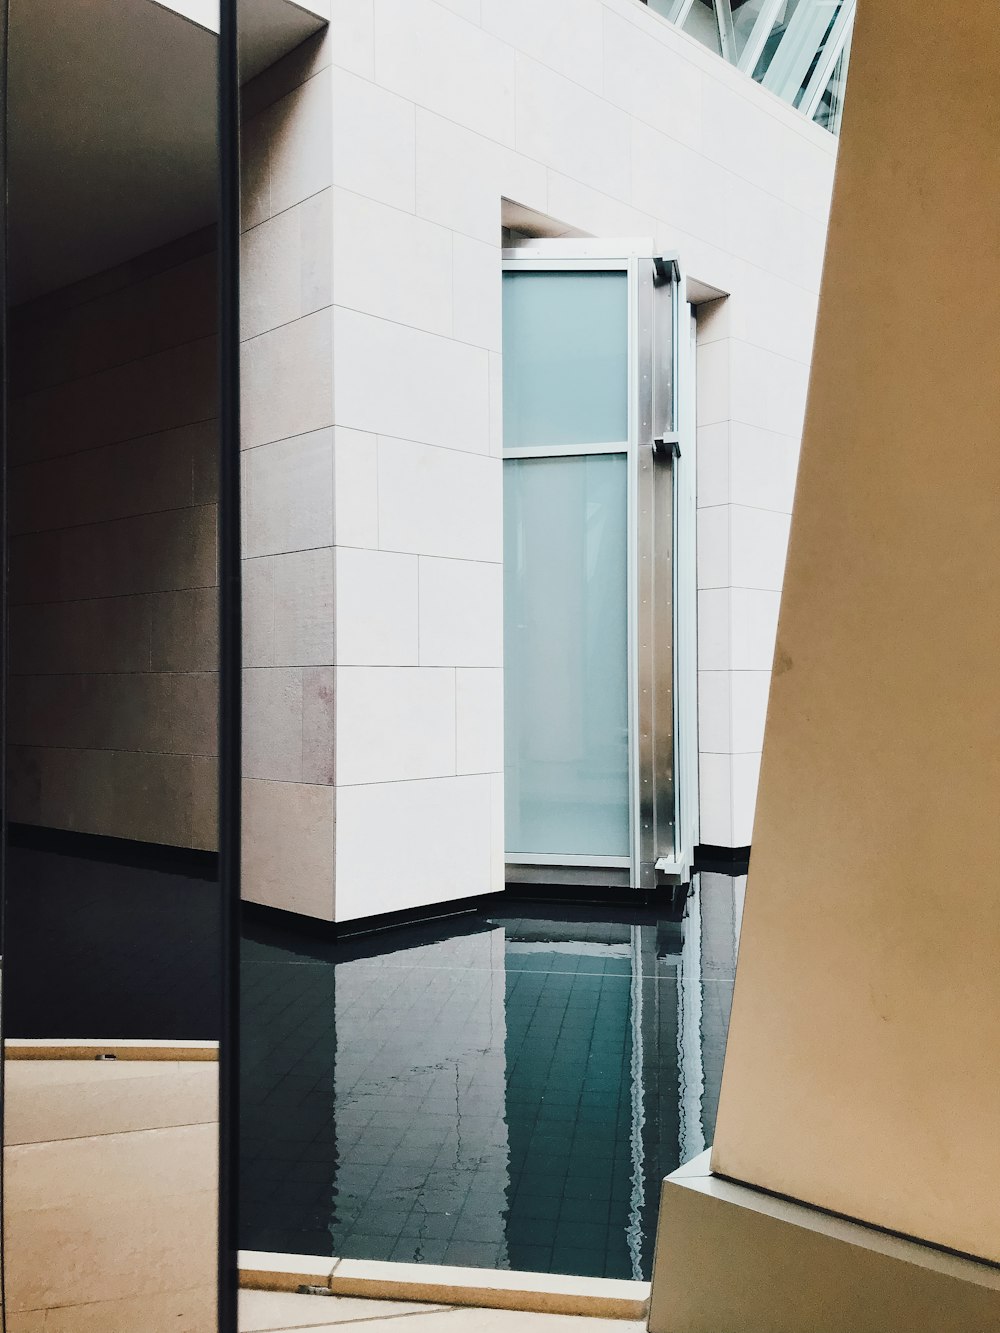 Louis Vuitton building surrounded by body of water photo – Free Louis  vuitton island Image on Unsplash